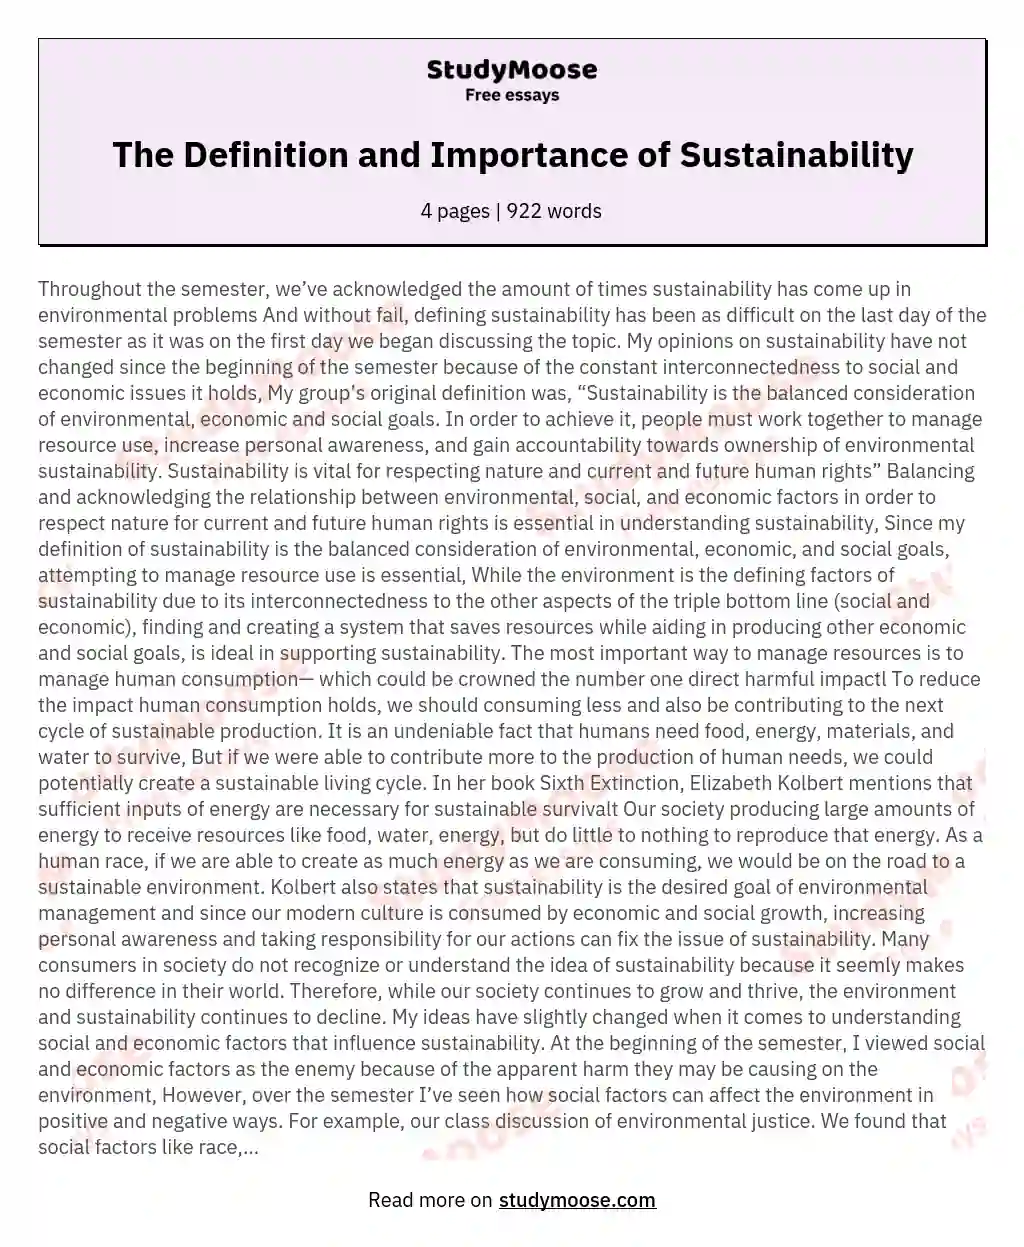 The Definition and Importance of Sustainability essay